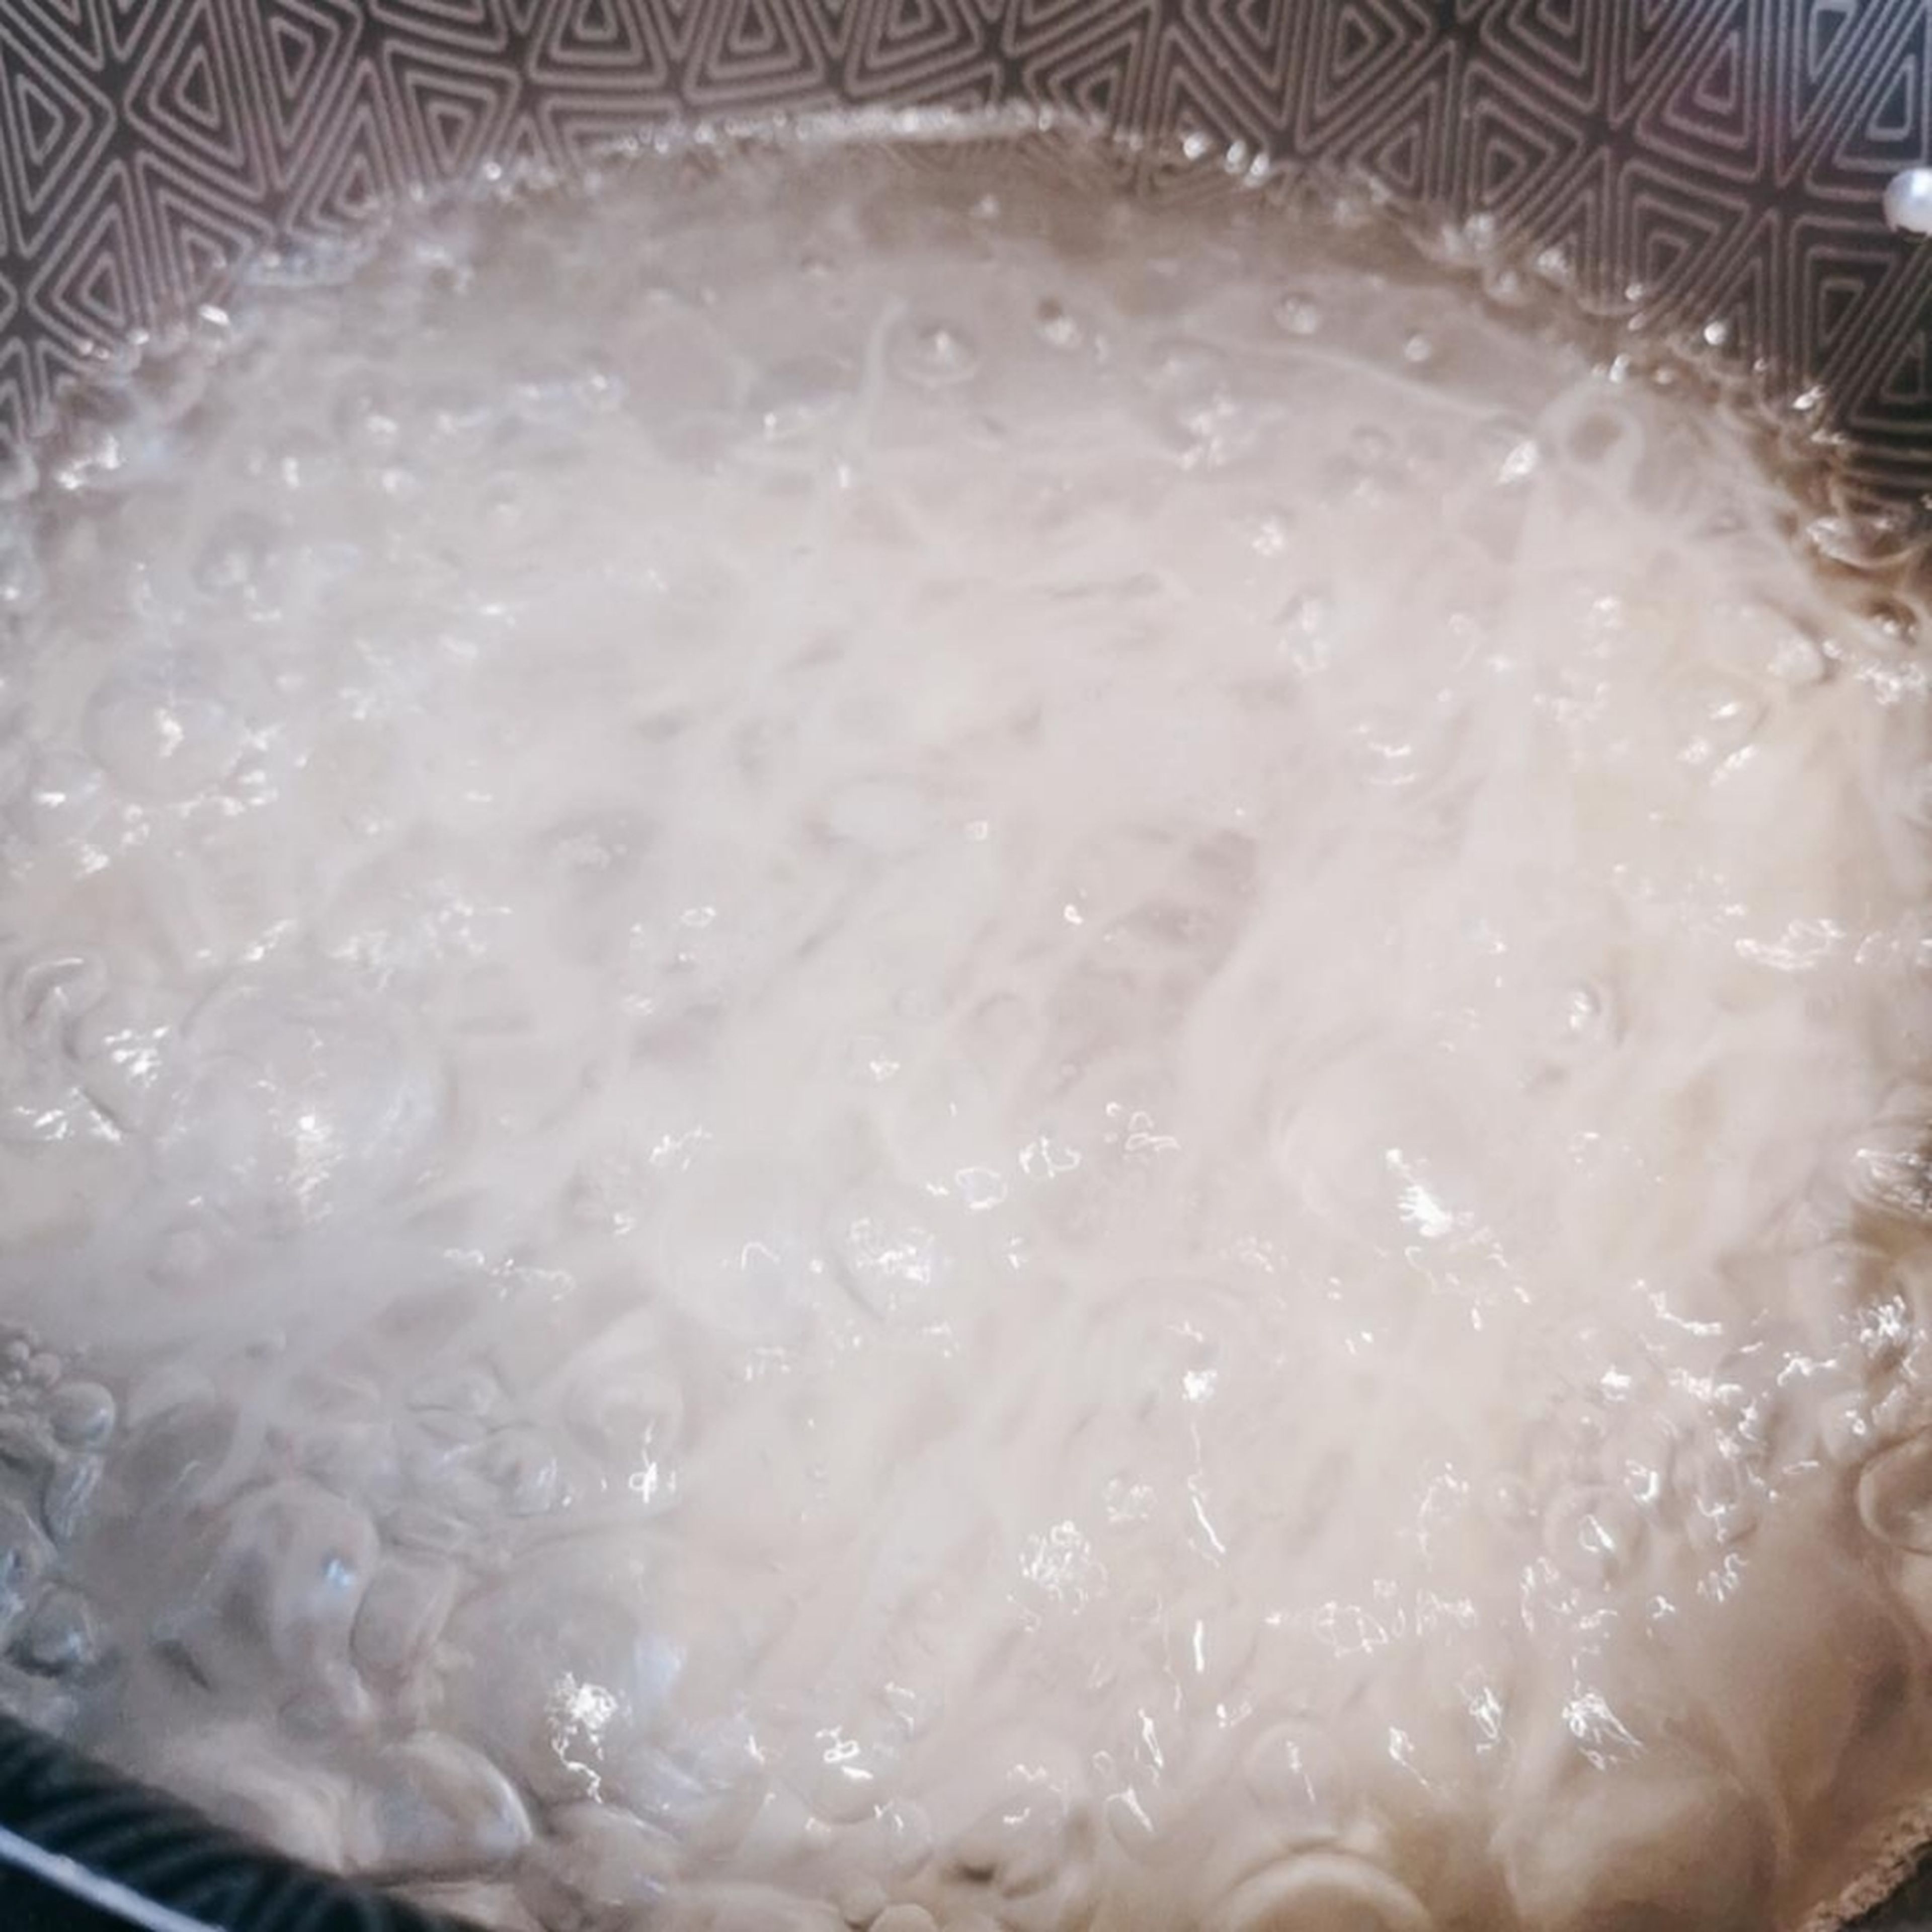 bolied water and add rice noodles 8 minutes